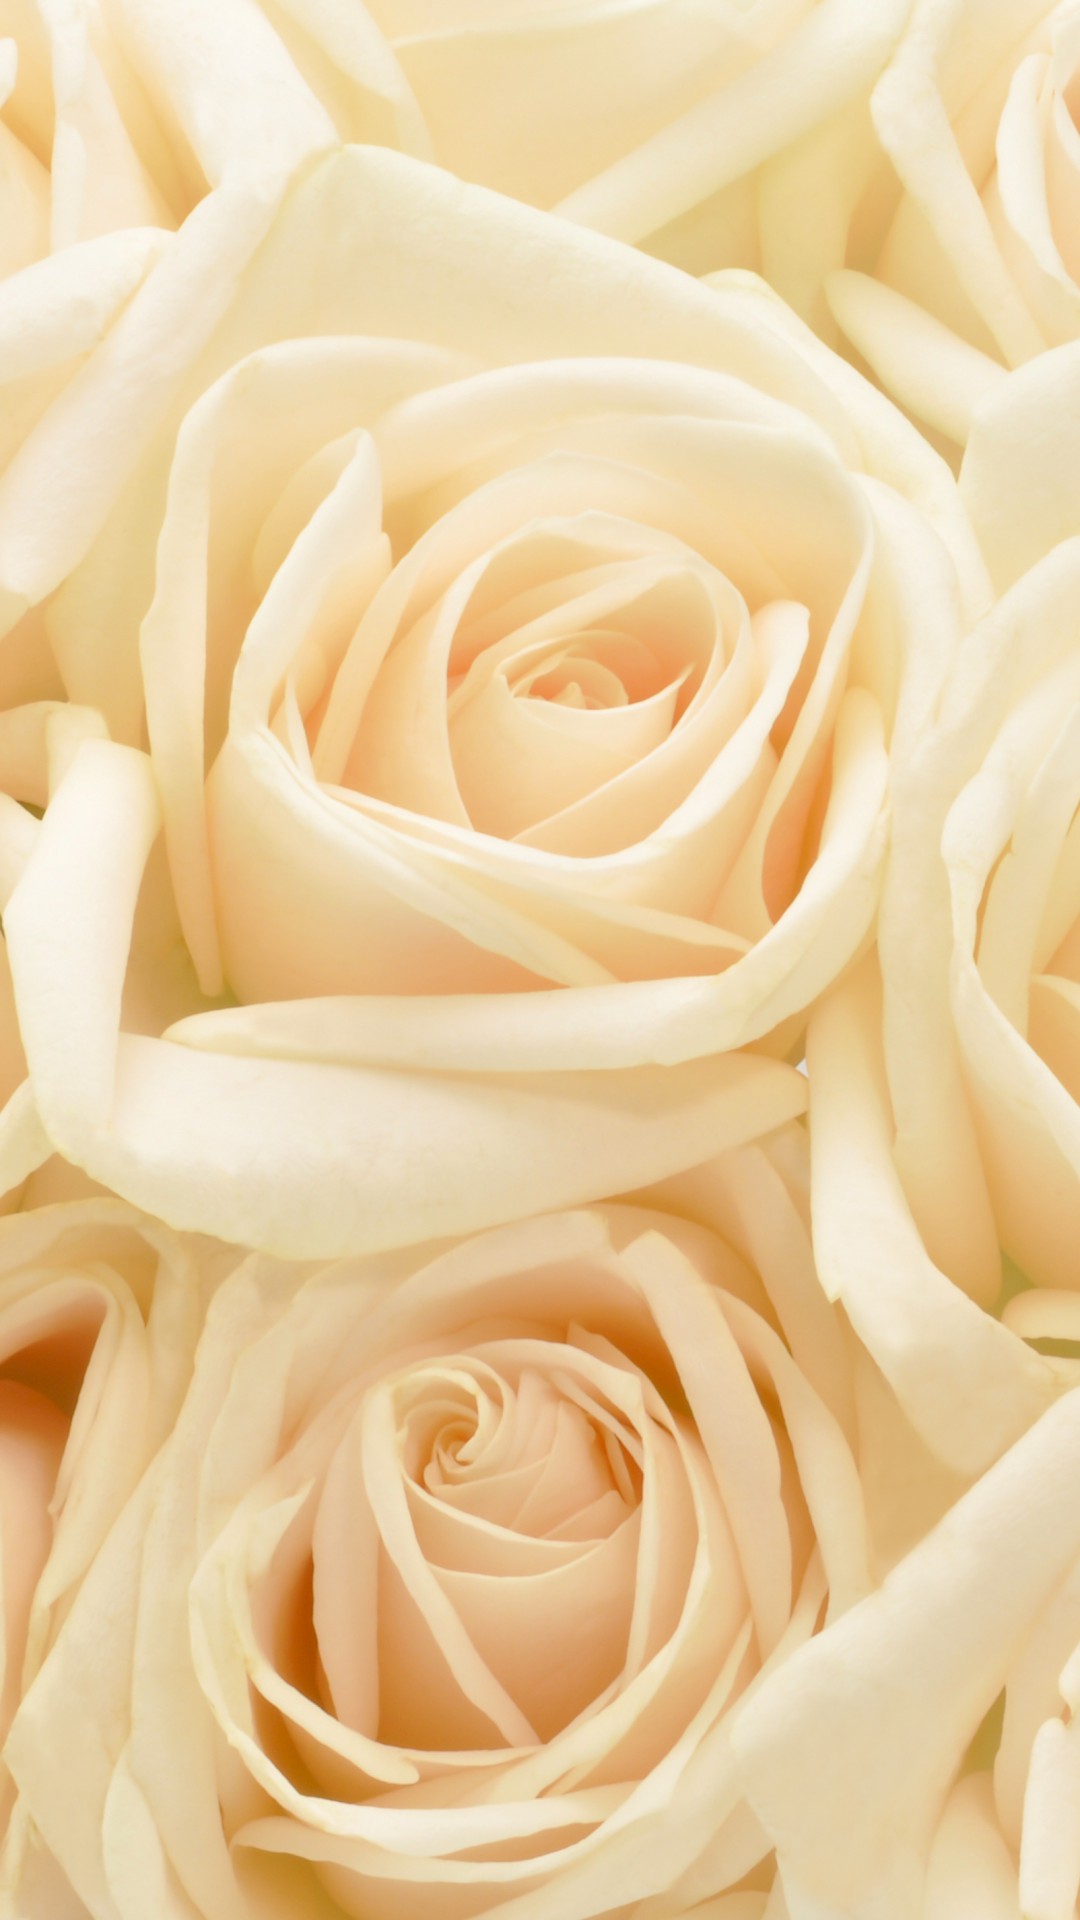 Pastel Roses Flowers Background Wallpapers - 1080x1920 - 194245